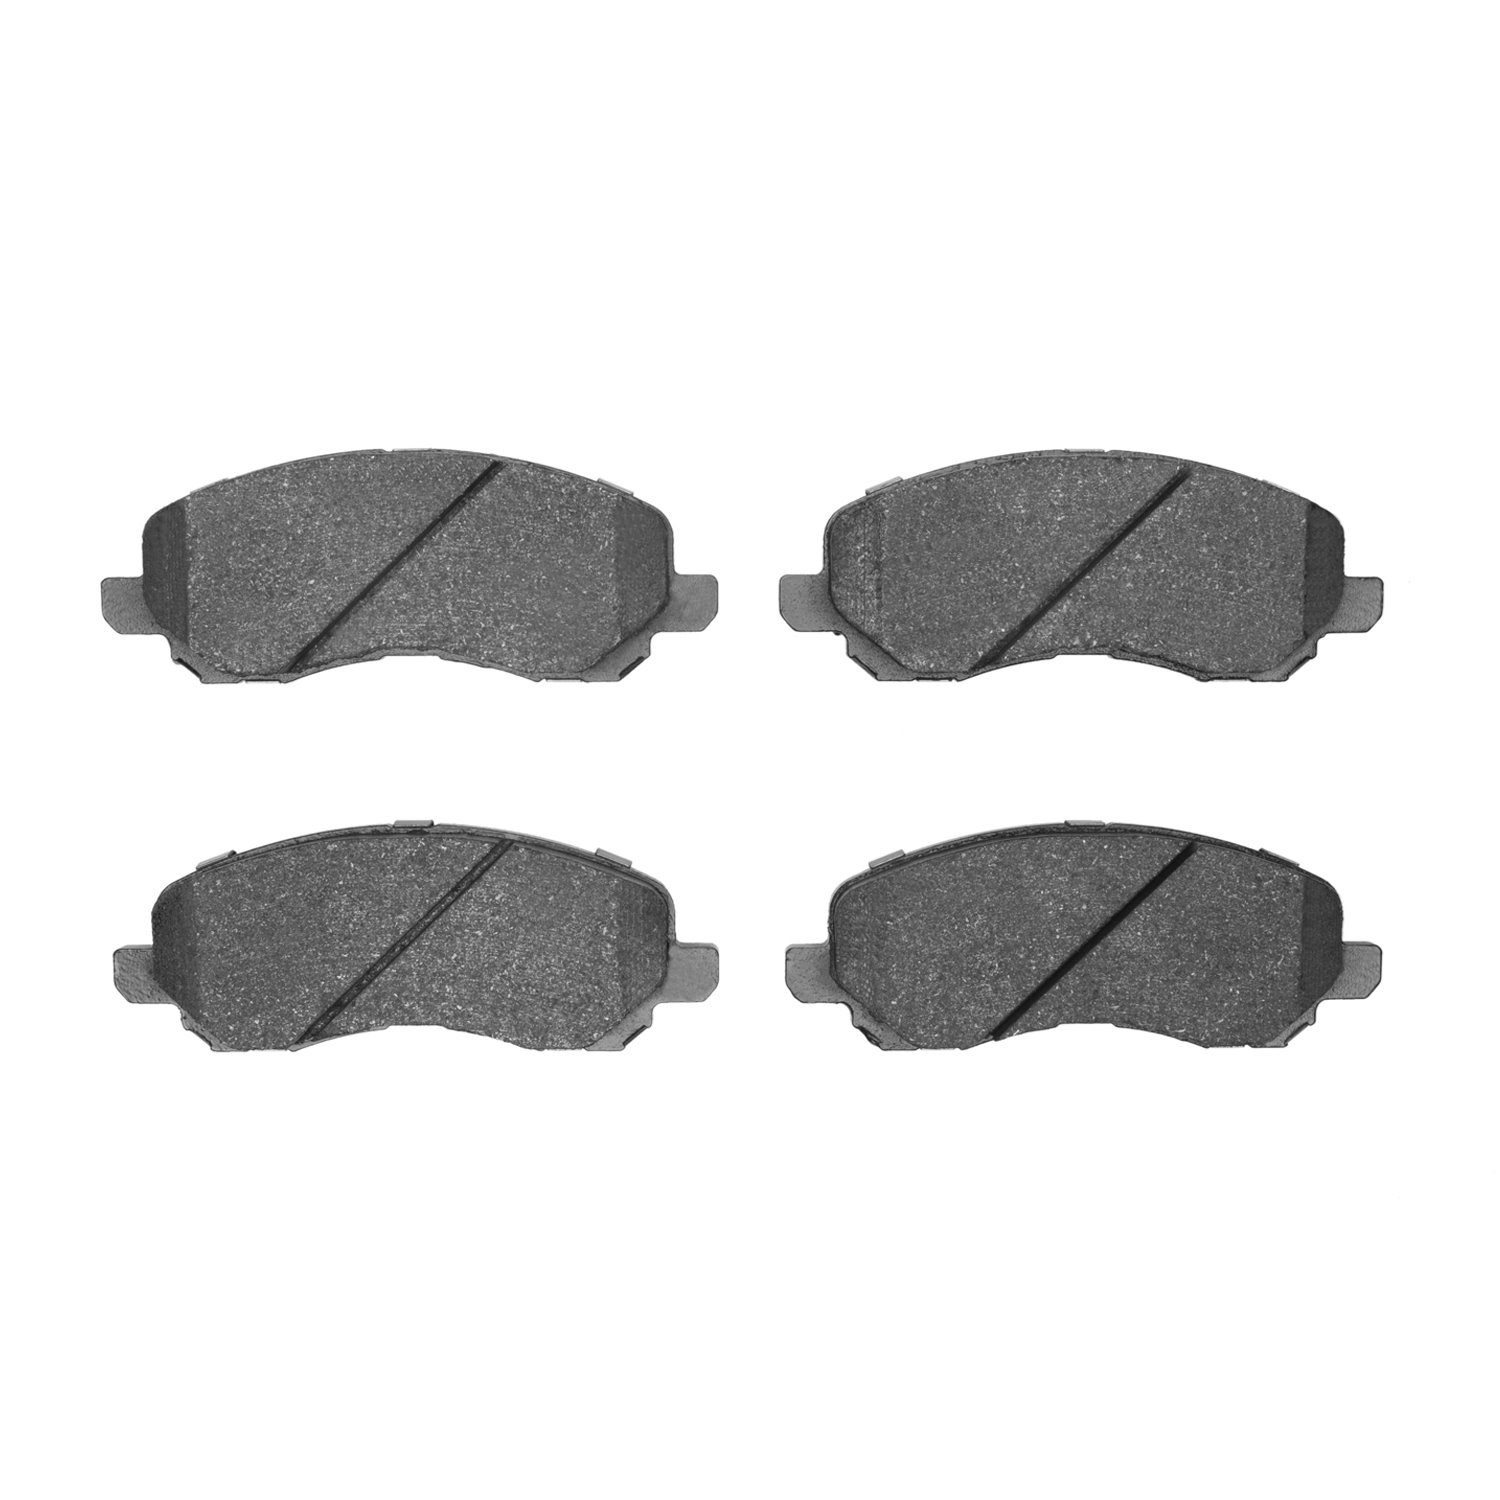 1115-0866-00 Active Performance Low-Metallic Brake Pads, Fits Select Multiple Makes/Models, Position: Front